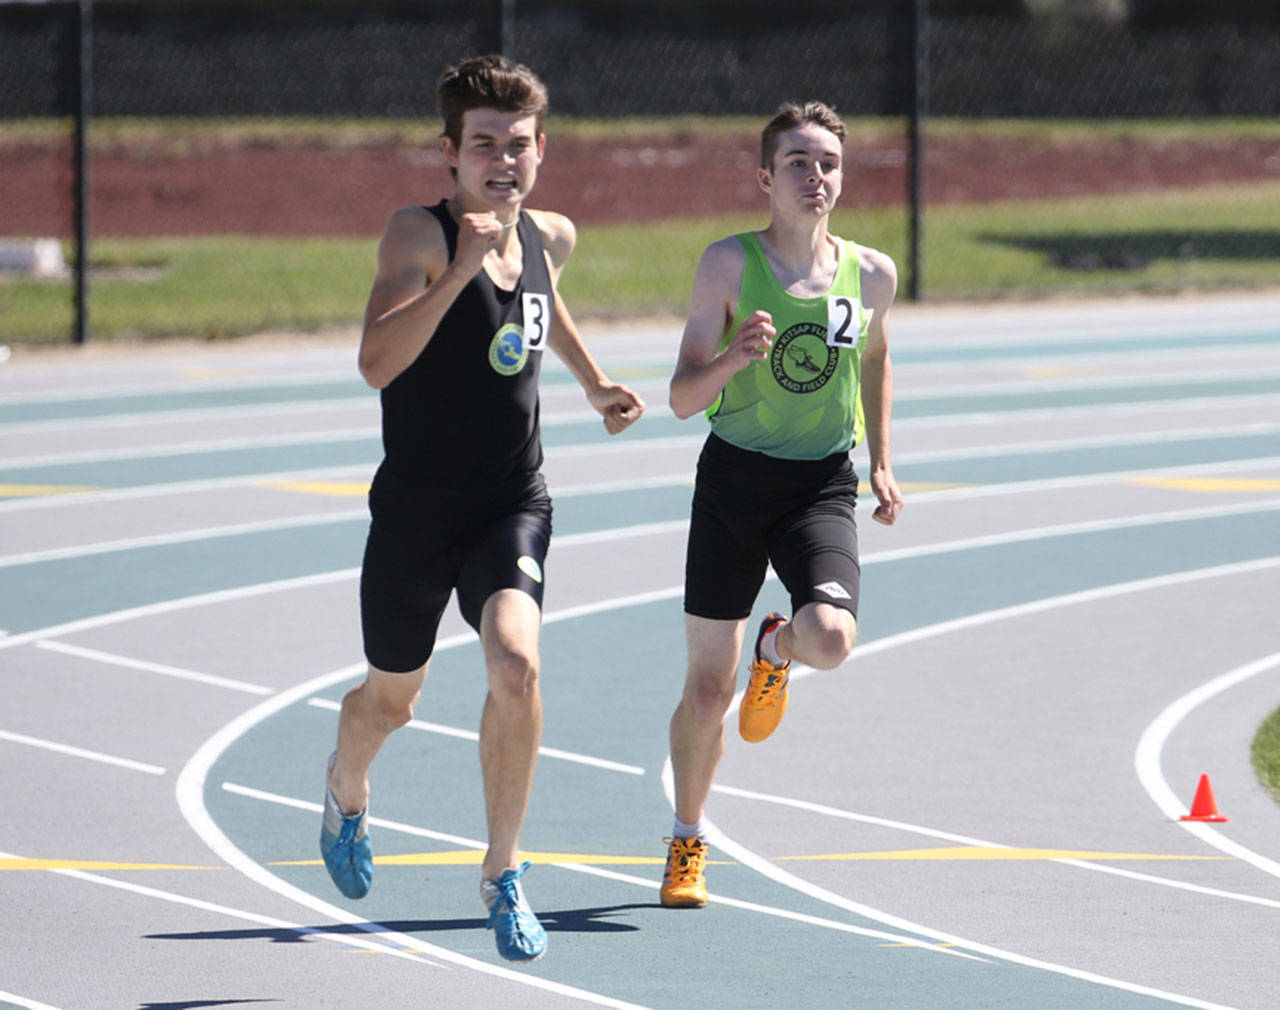 Coupeville’s Danny Conlisk, right, runs to third place in the 400 meters at the Junior Olympics regional meet last weekend. (Photo by John Fisken)